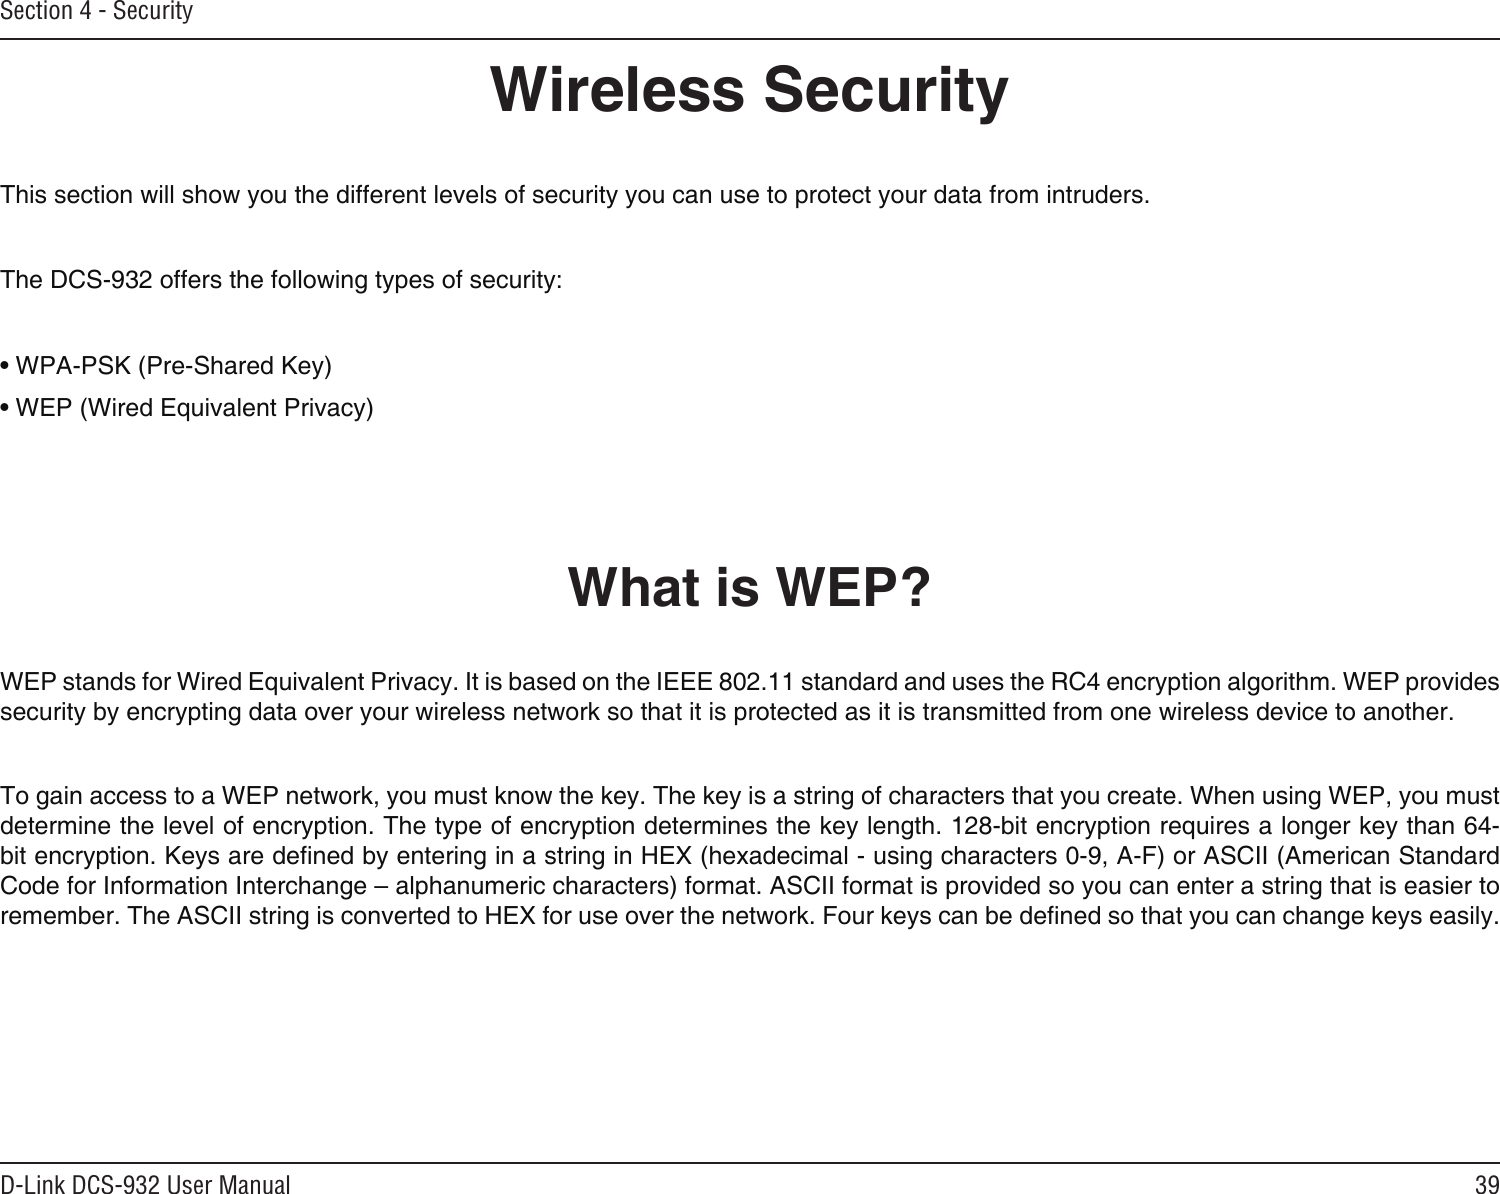 39D-Link DCS-932 User ManualSection 4 - SecurityWireless SecurityThis section will show you the different levels of security you can use to protect your data from intruders.The DCS-932 offers the following types of security:• WPA-PSK (Pre-Shared Key)• WEP (Wired Equivalent Privacy)What is WEP?WEP stands for Wired Equivalent Privacy. It is based on the IEEE 802.11 standard and uses the RC4 encryption algorithm. WEP provides security by encrypting data over your wireless network so that it is protected as it is transmitted from one wireless device to another.To gain access to a WEP network, you must know the key. The key is a string of characters that you create. When using WEP, you must determine the level of encryption. The type of encryption determines the key length. 128-bit encryption requires a longer key than 64-bit encryption. Keys are dened by entering in a string in HEX (hexadecimal - using characters 0-9, A-F) or ASCII (American Standard Code for Information Interchange – alphanumeric characters) format. ASCII format is provided so you can enter a string that is easier to remember. The ASCII string is converted to HEX for use over the network. Four keys can be dened so that you can change keys easily.